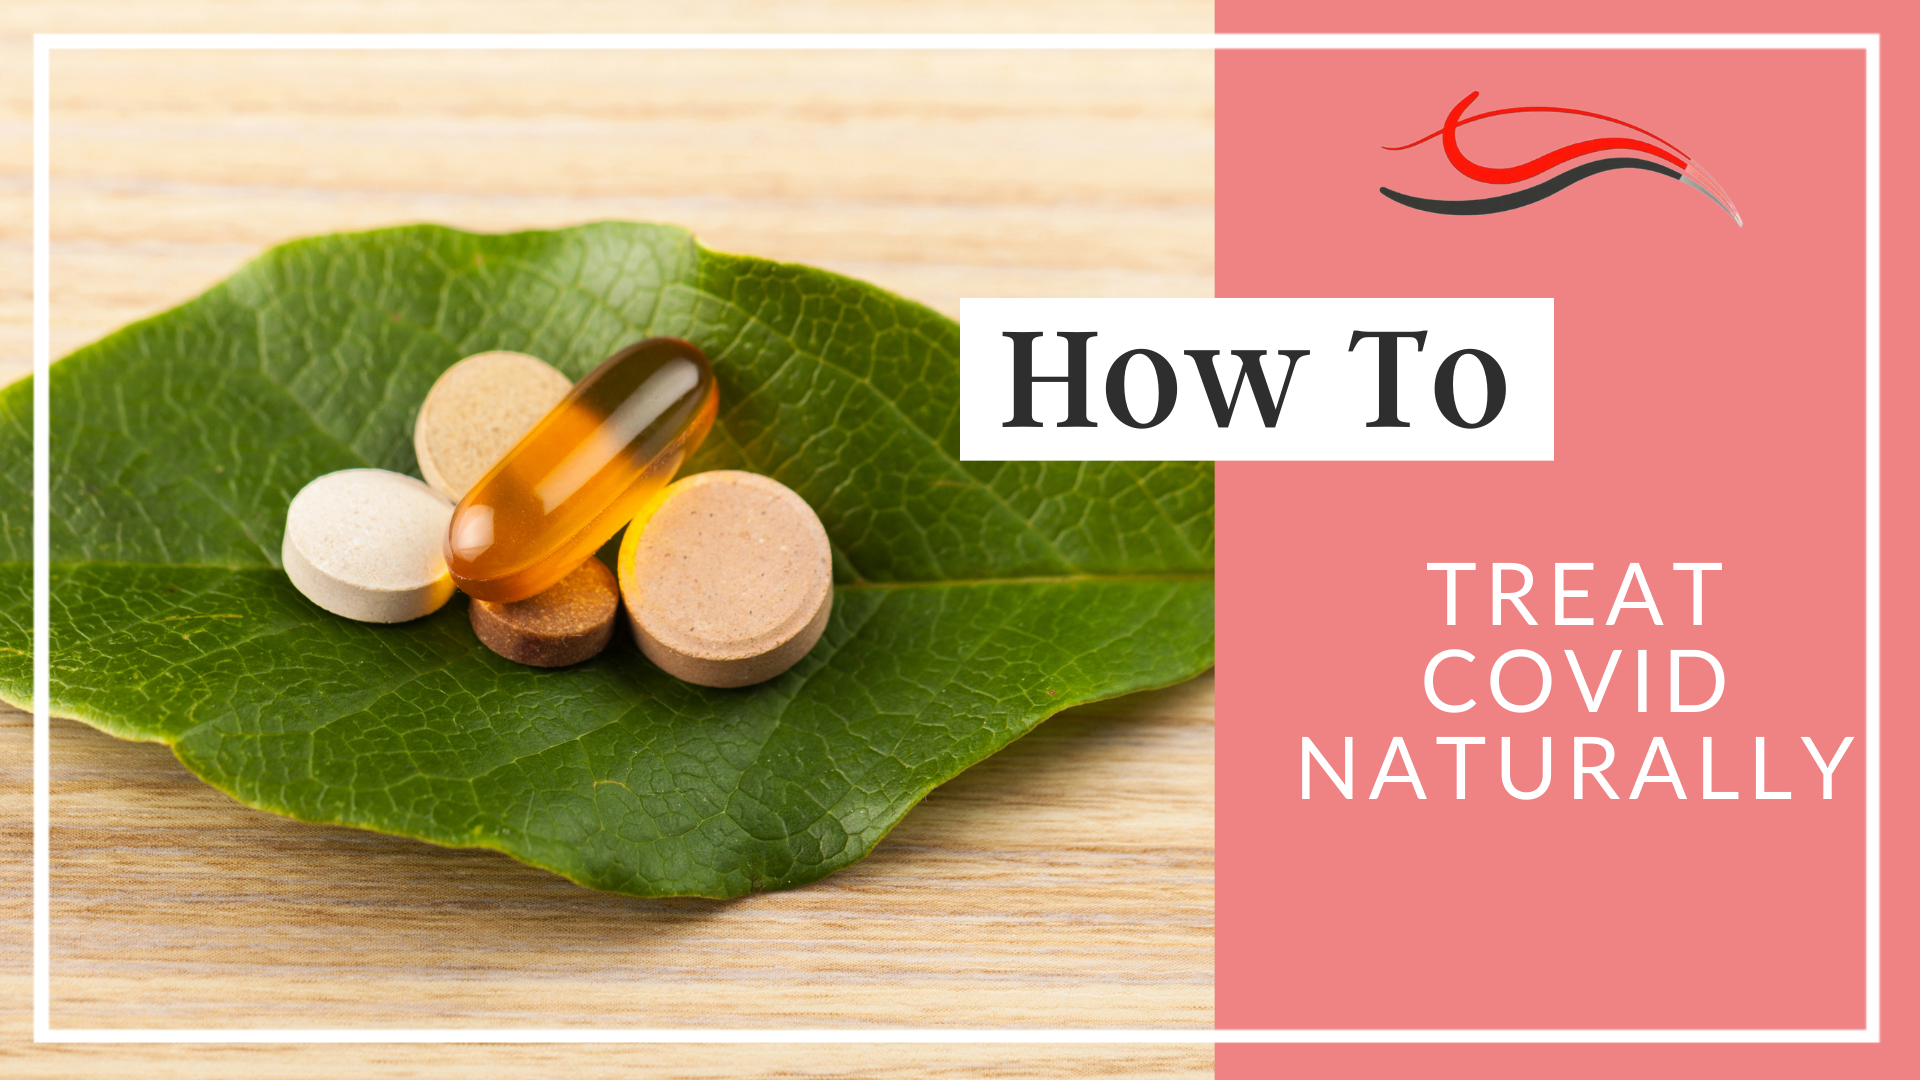 How to Treat Covid Naturally with Supplements and Herbs